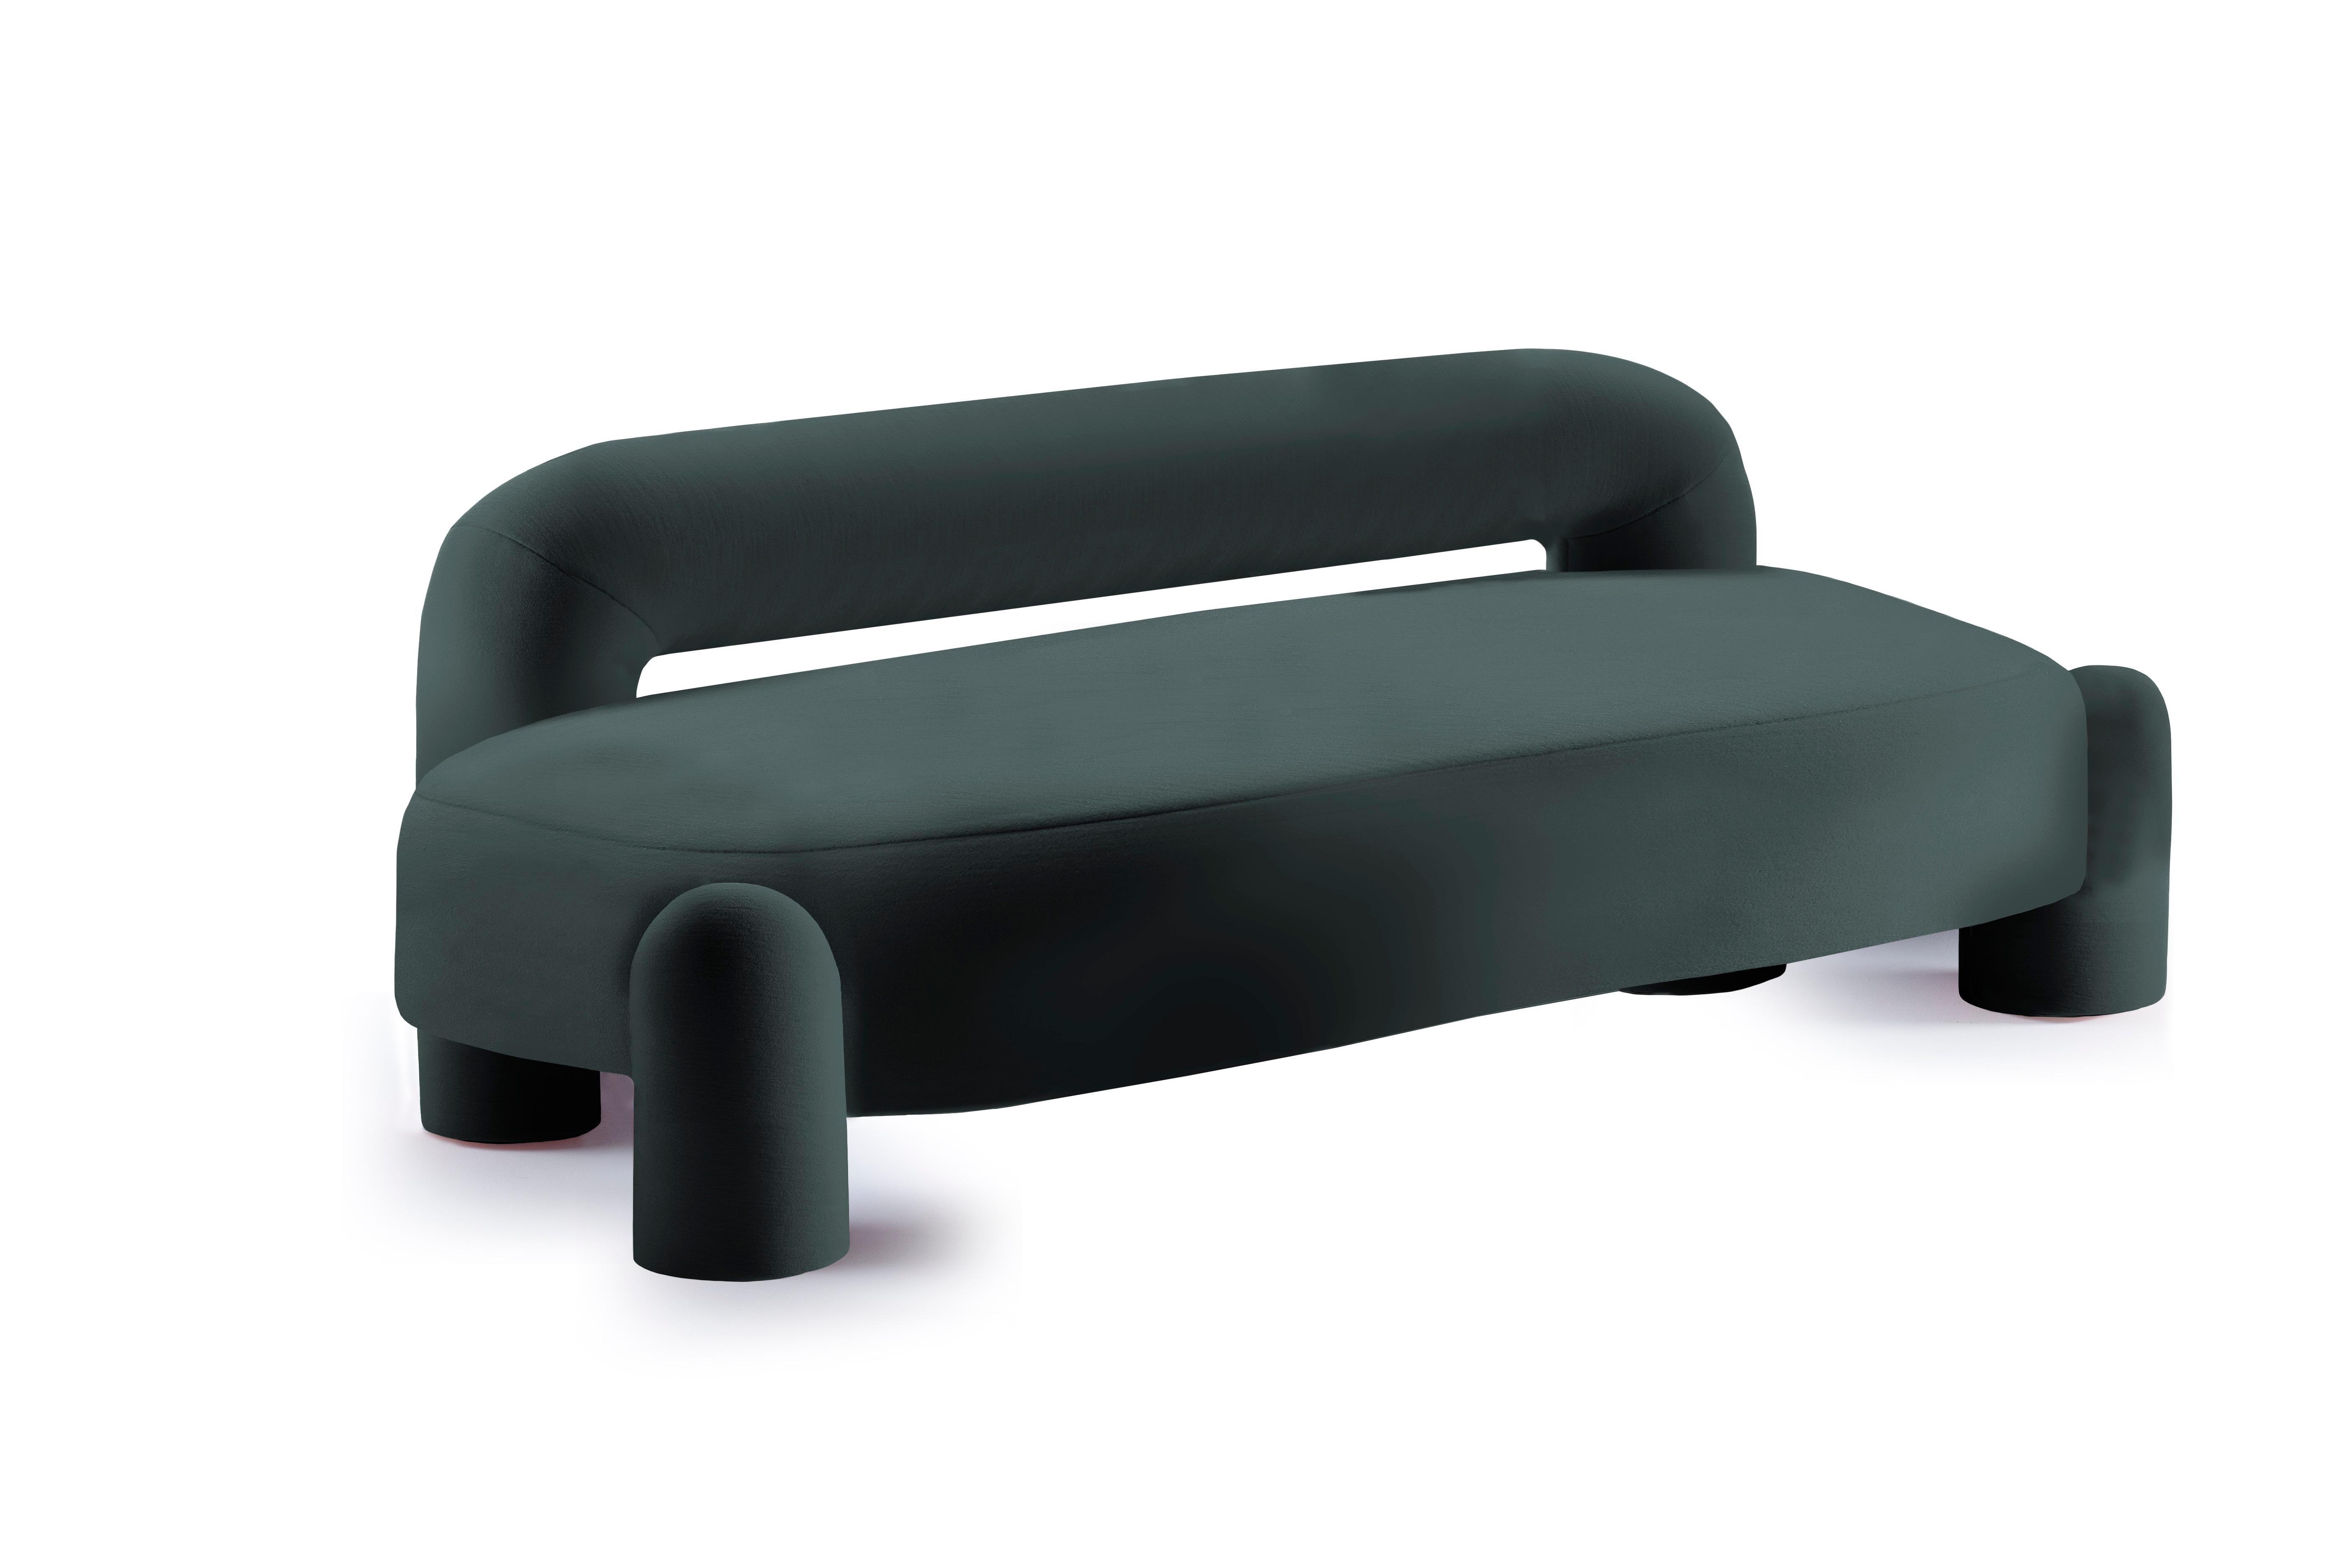 Marlon Daybed II by Pietro Franceschini
Dimensions: W 74 x D 190 x H 62.5 x Seat H 40 cm
Available in other size: D150 cm.

Materials & Finishes
Upholstery: fully upholstered in fabric or leather.

Product
When pure geometry meets soft curves,